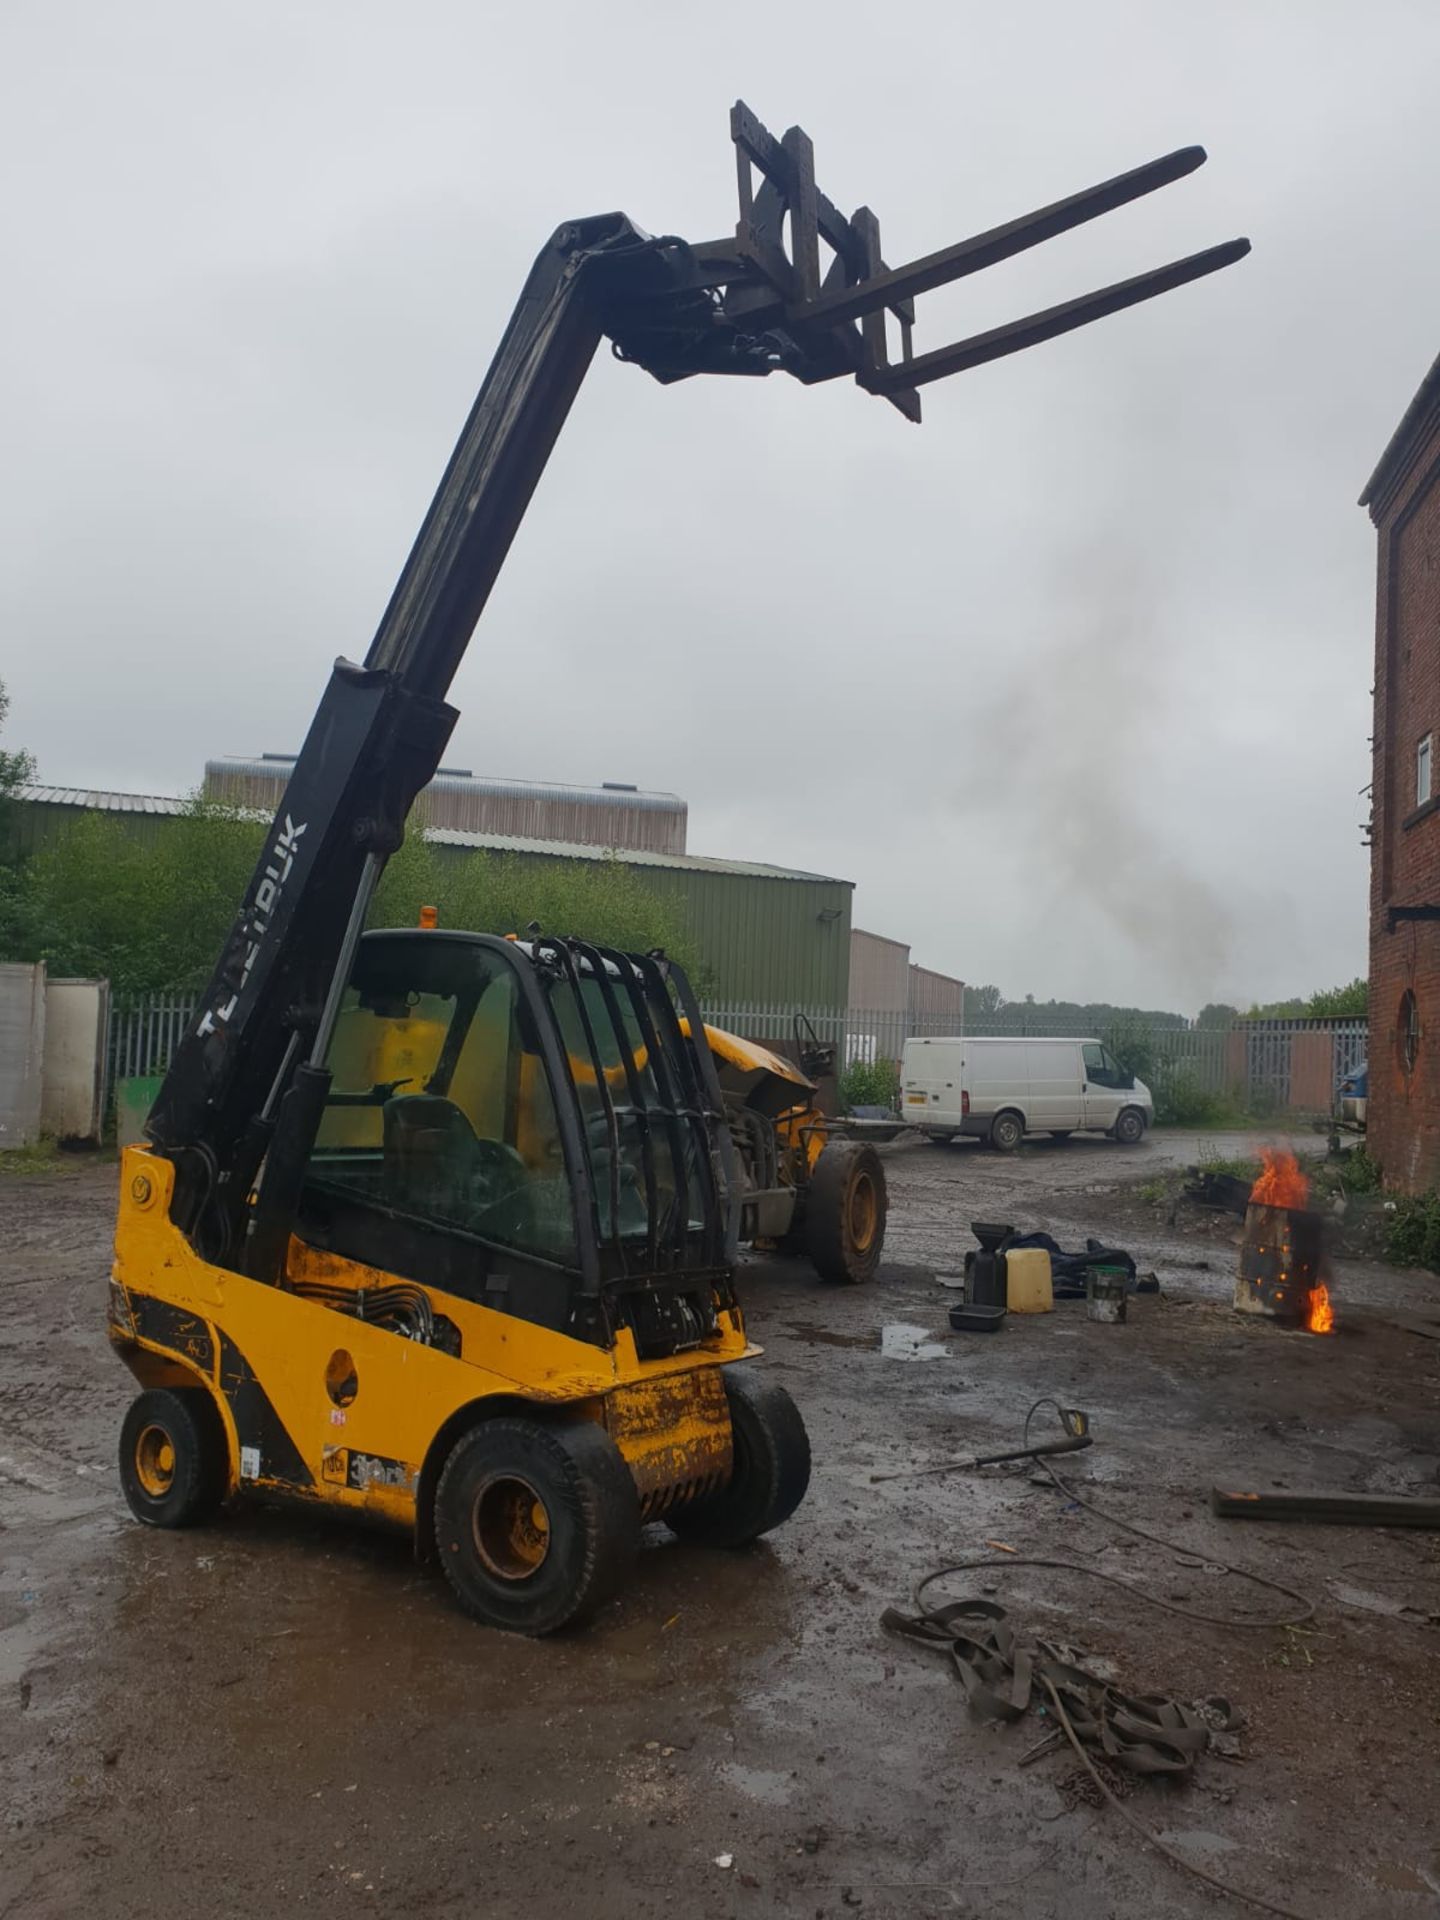 JCB 30D TELEHANDLER FULL WORKING ORDER, STARTS FIRST TOUCH OF THE KEY, RUNS, DRIVES, BOOMS OUT